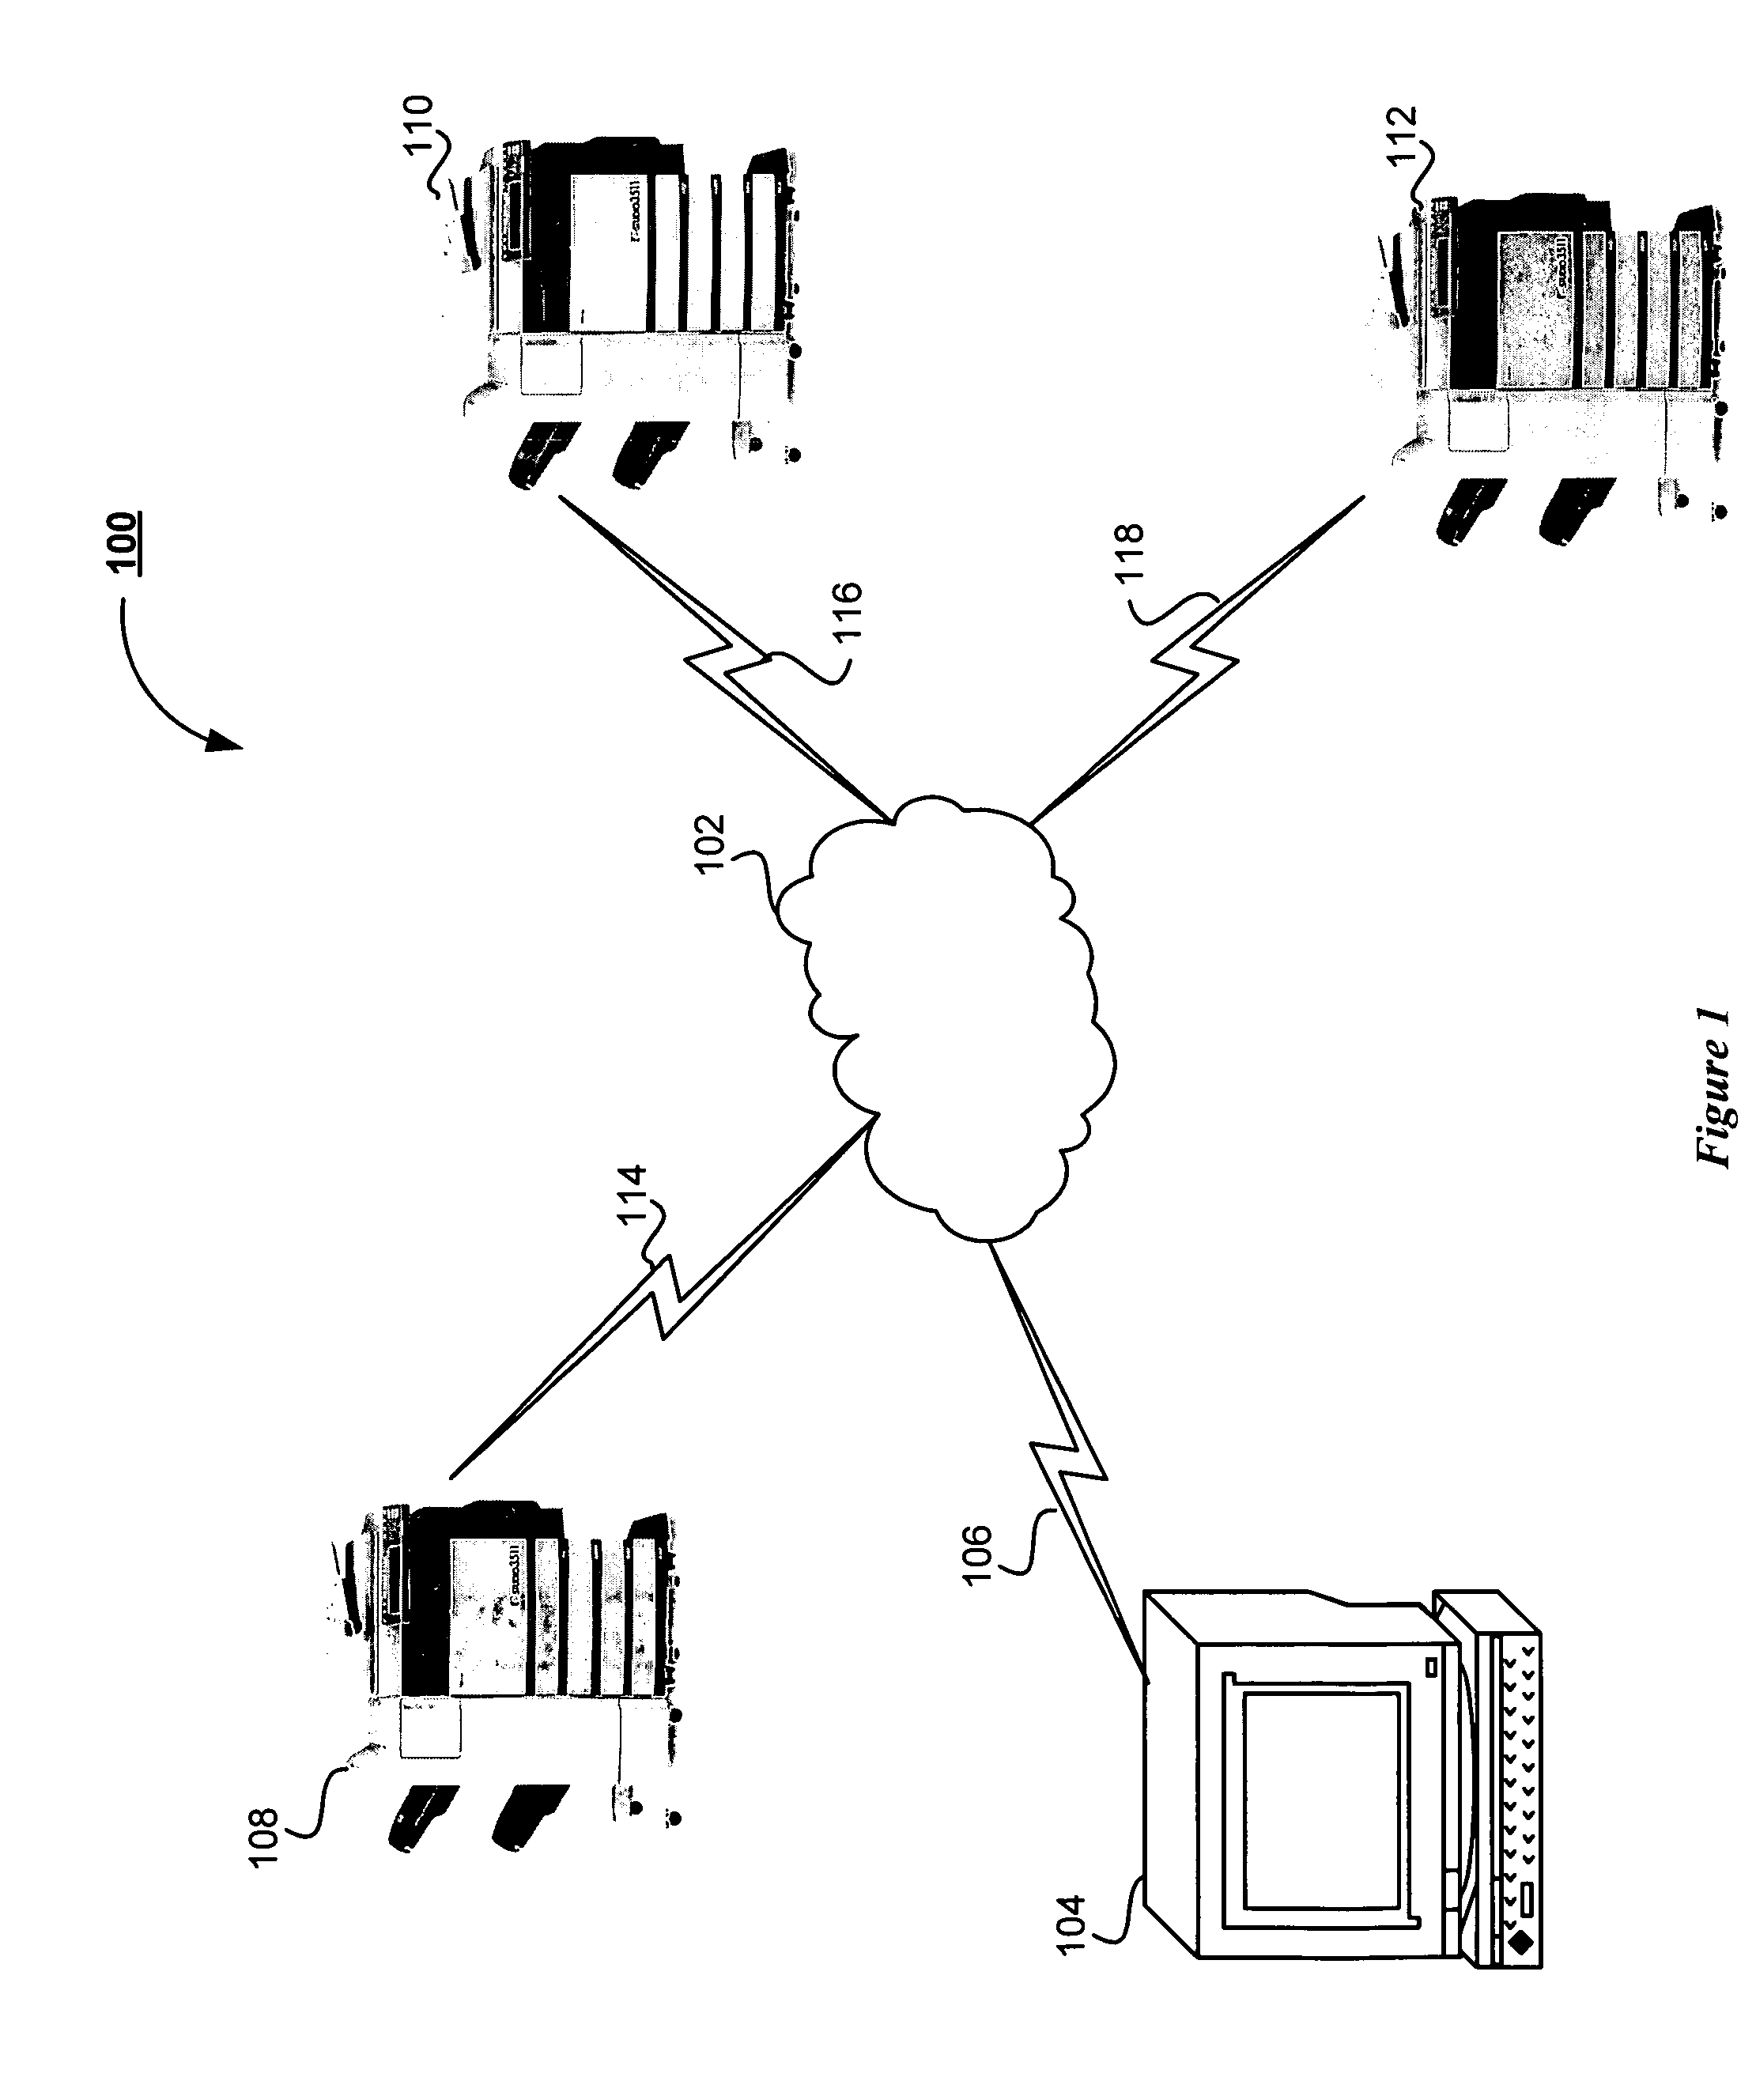 System and method for rerouting of document processing jobs